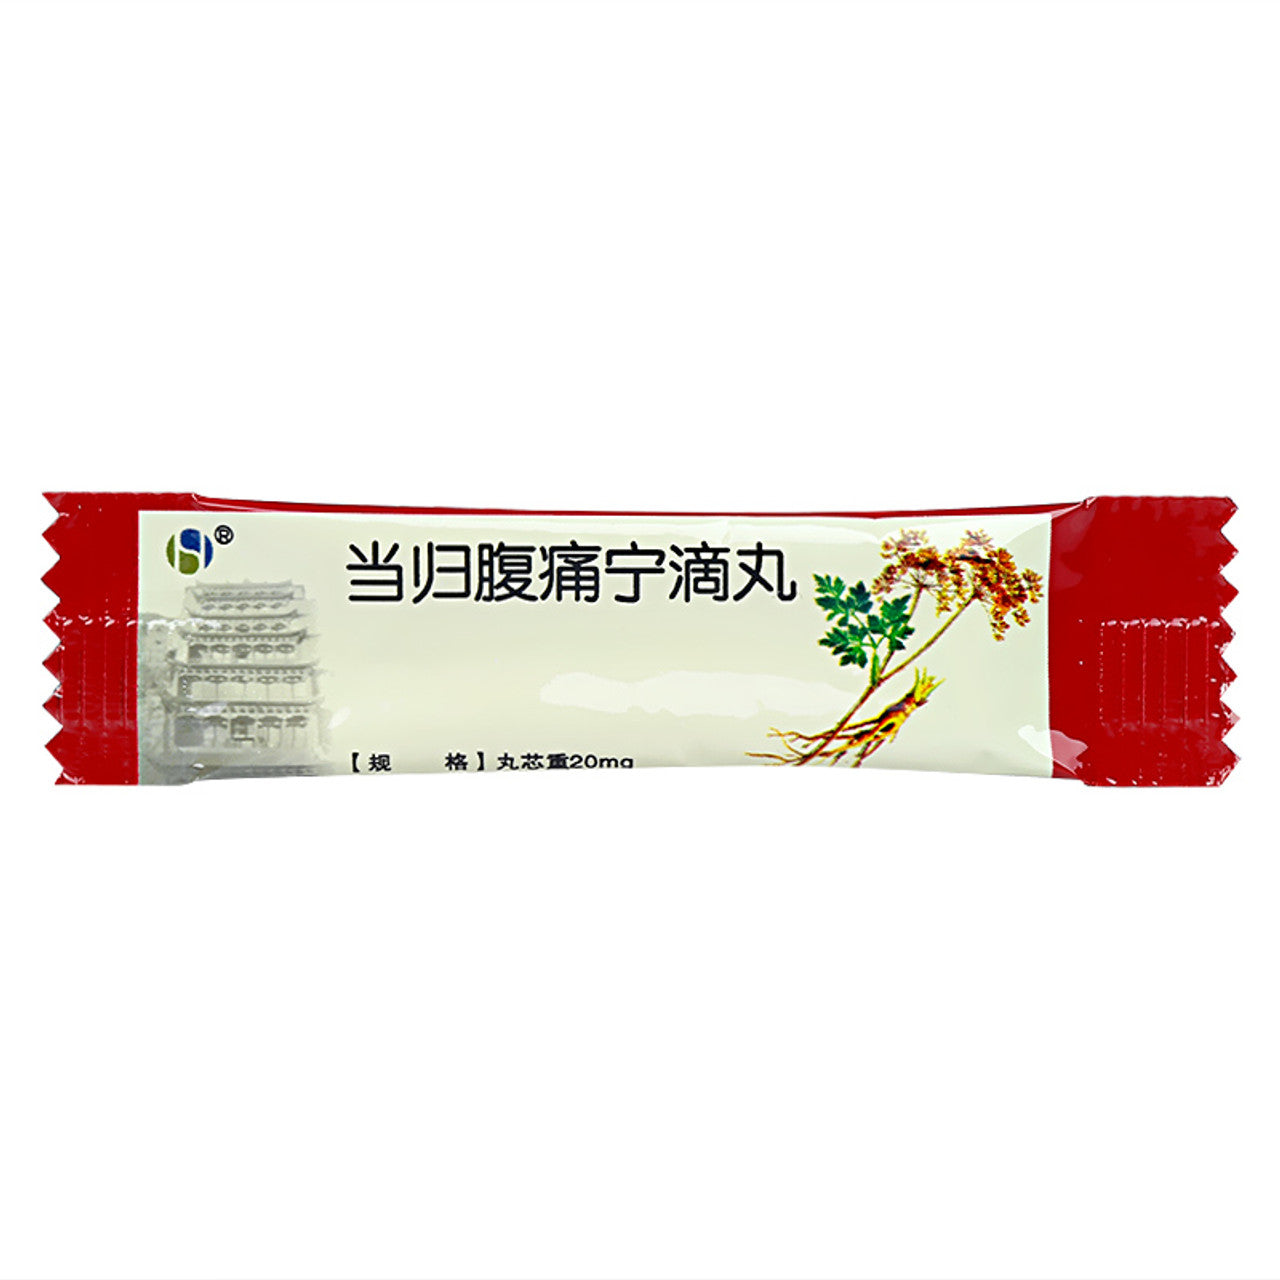 China Herb. Brand Heshengtang. Danggui Futongning Diwan or  Danggui Futongning Dripping Pills or Dang Gui Fu Tong Ning Di Wan for dysmenorrhea, postpartum contractions, and acute abdominal pain caused by infectious diarrhea.